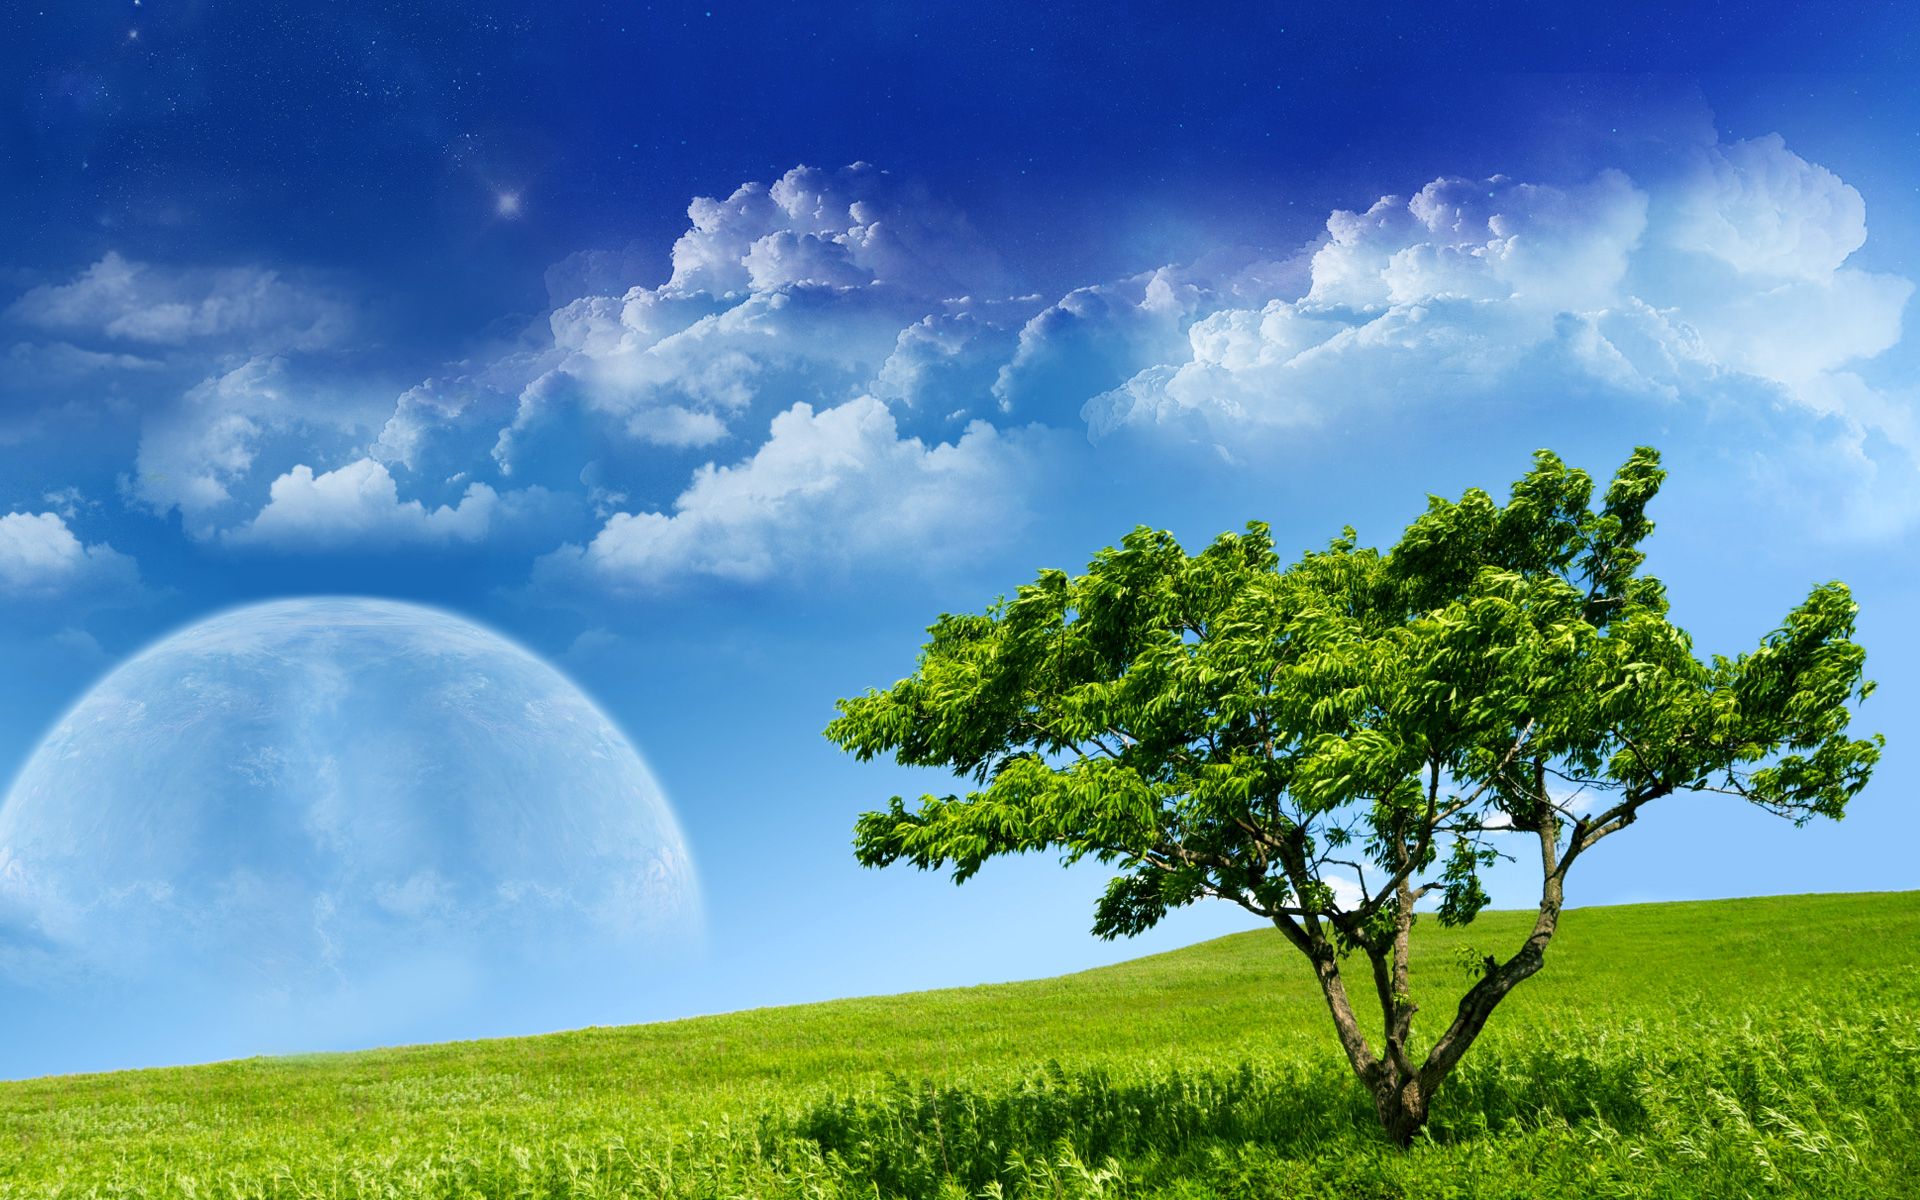 android landscape, moon, earth, a dreamy world, cloud, surreal, tree